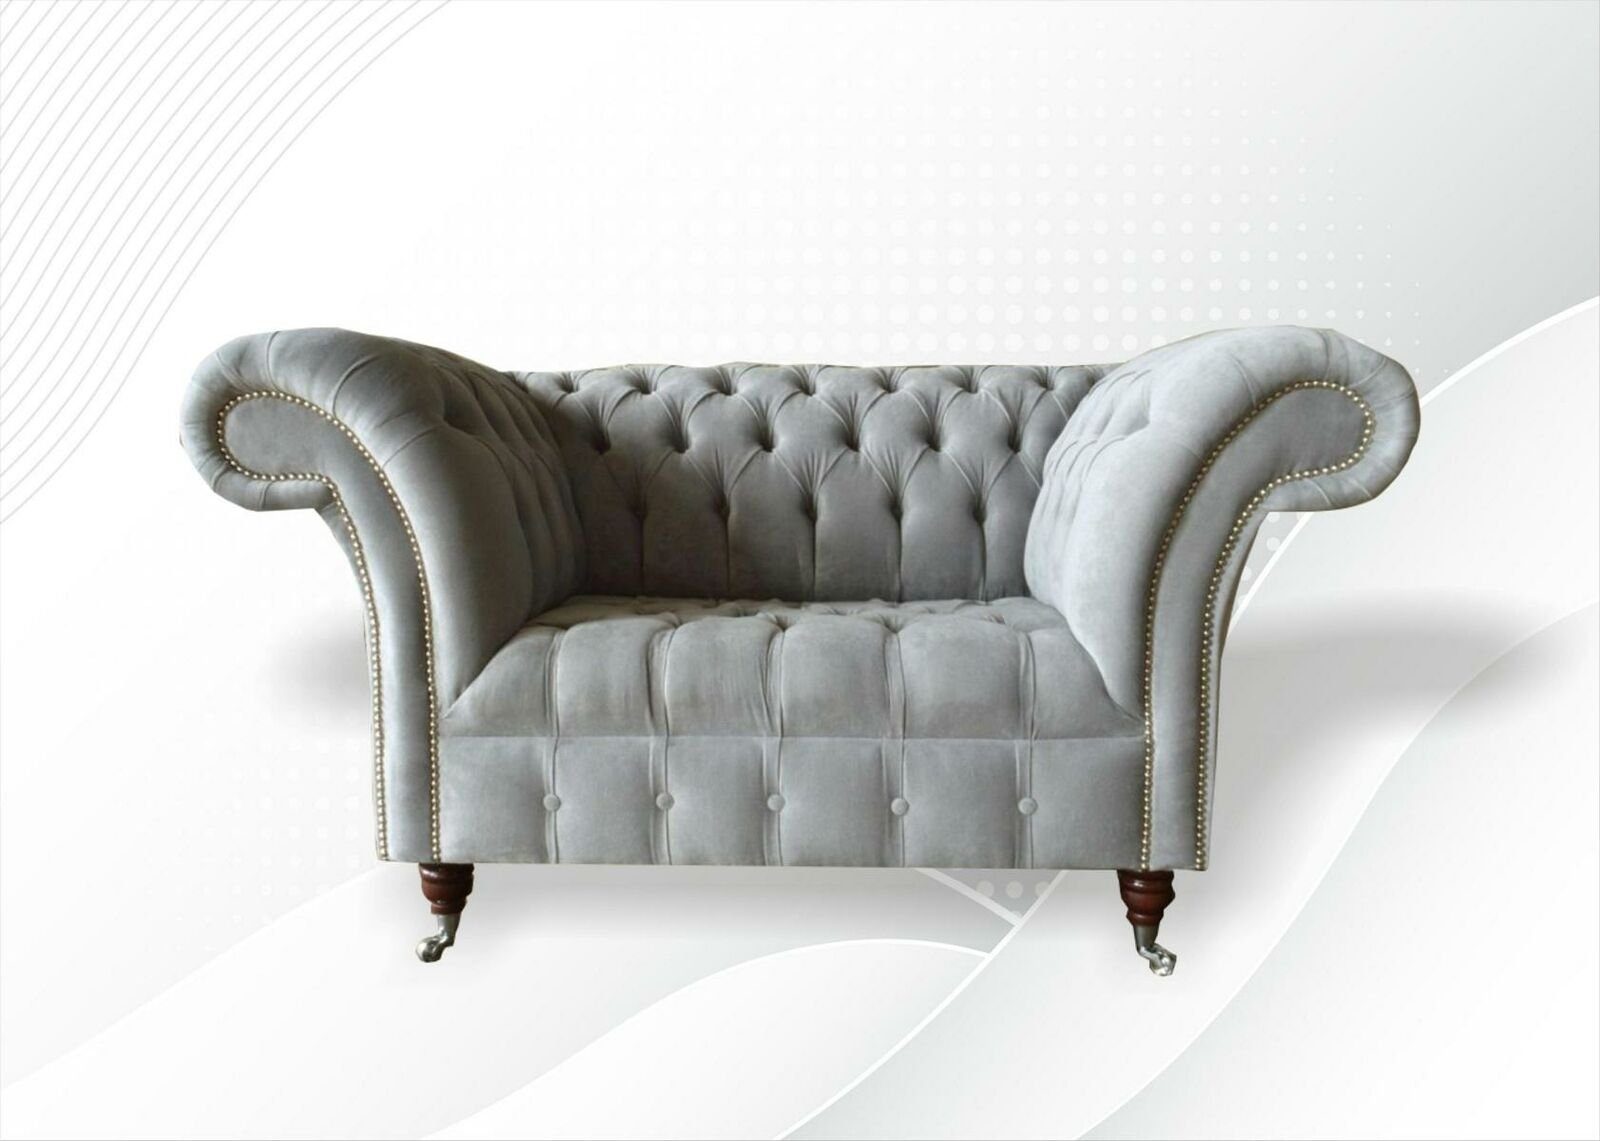 JVmoebel Chesterfield-Sessel, Sessel Chesterfield Textil Couchen Sofa Grau Sitzer 1,5 Couch Polster